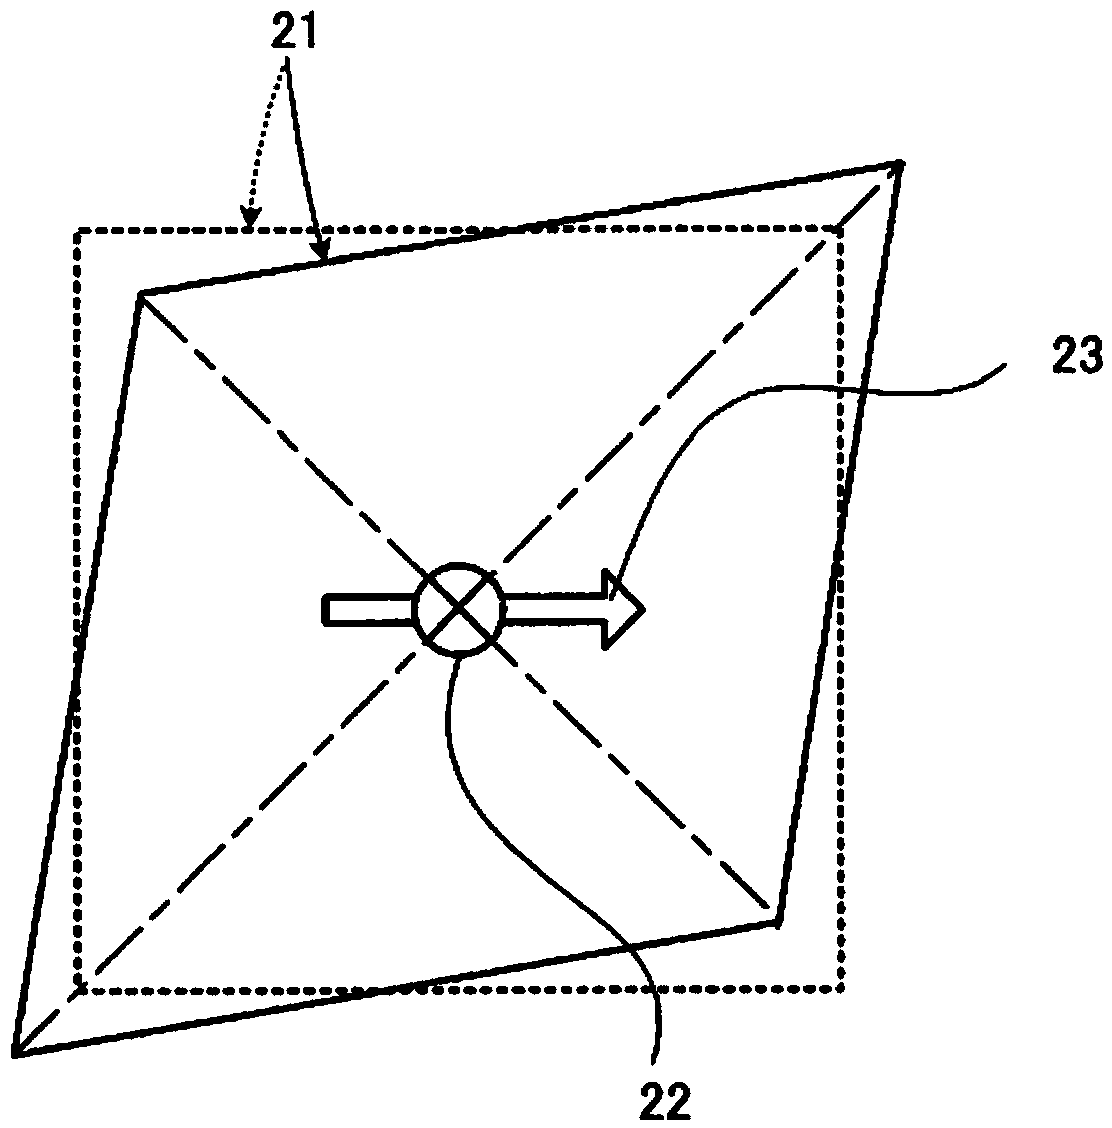 Sensor device and electronic apparatus